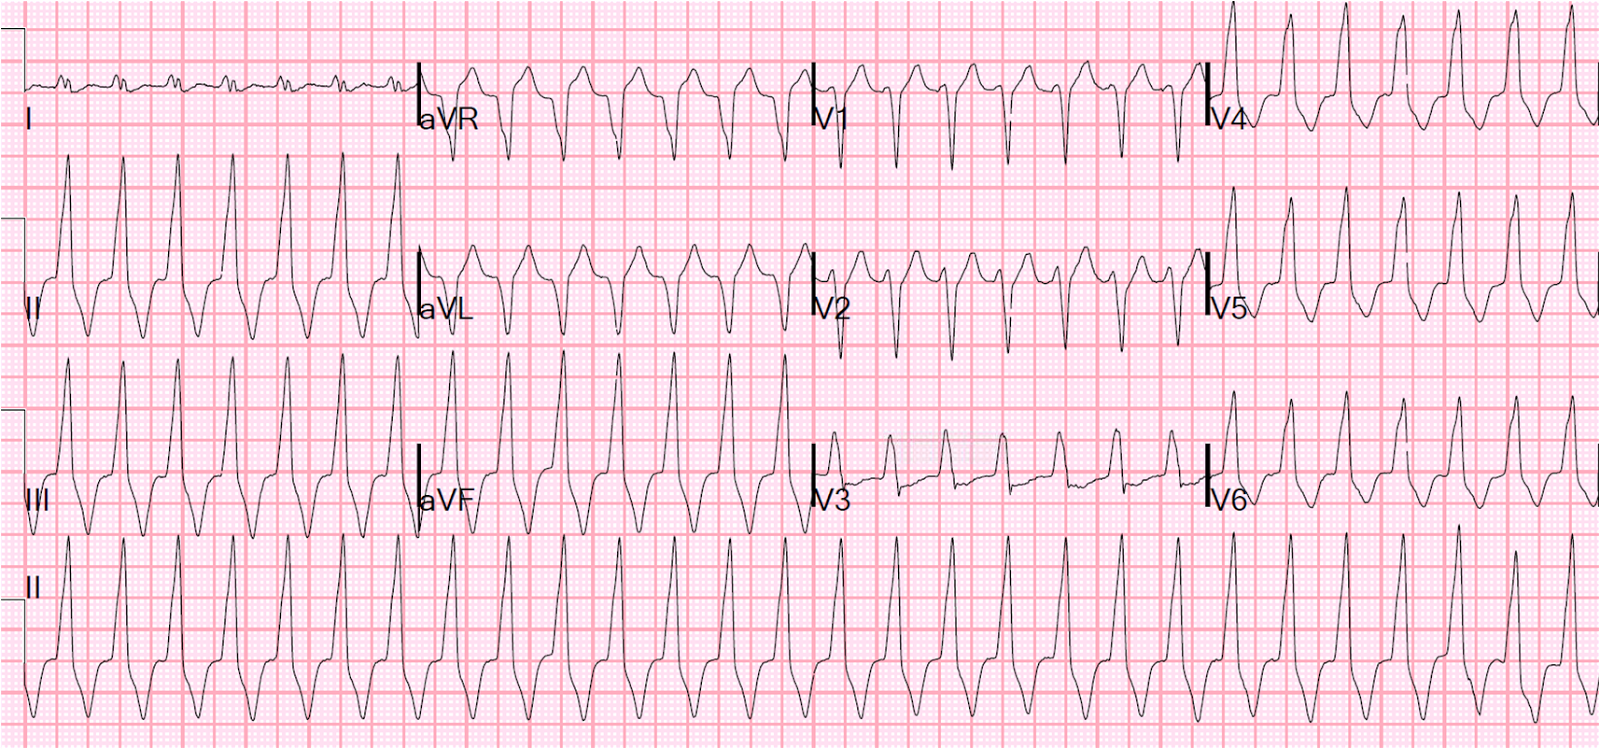 dr-smith-s-ecg-blog-regular-wide-complex-tachycardia-what-is-the